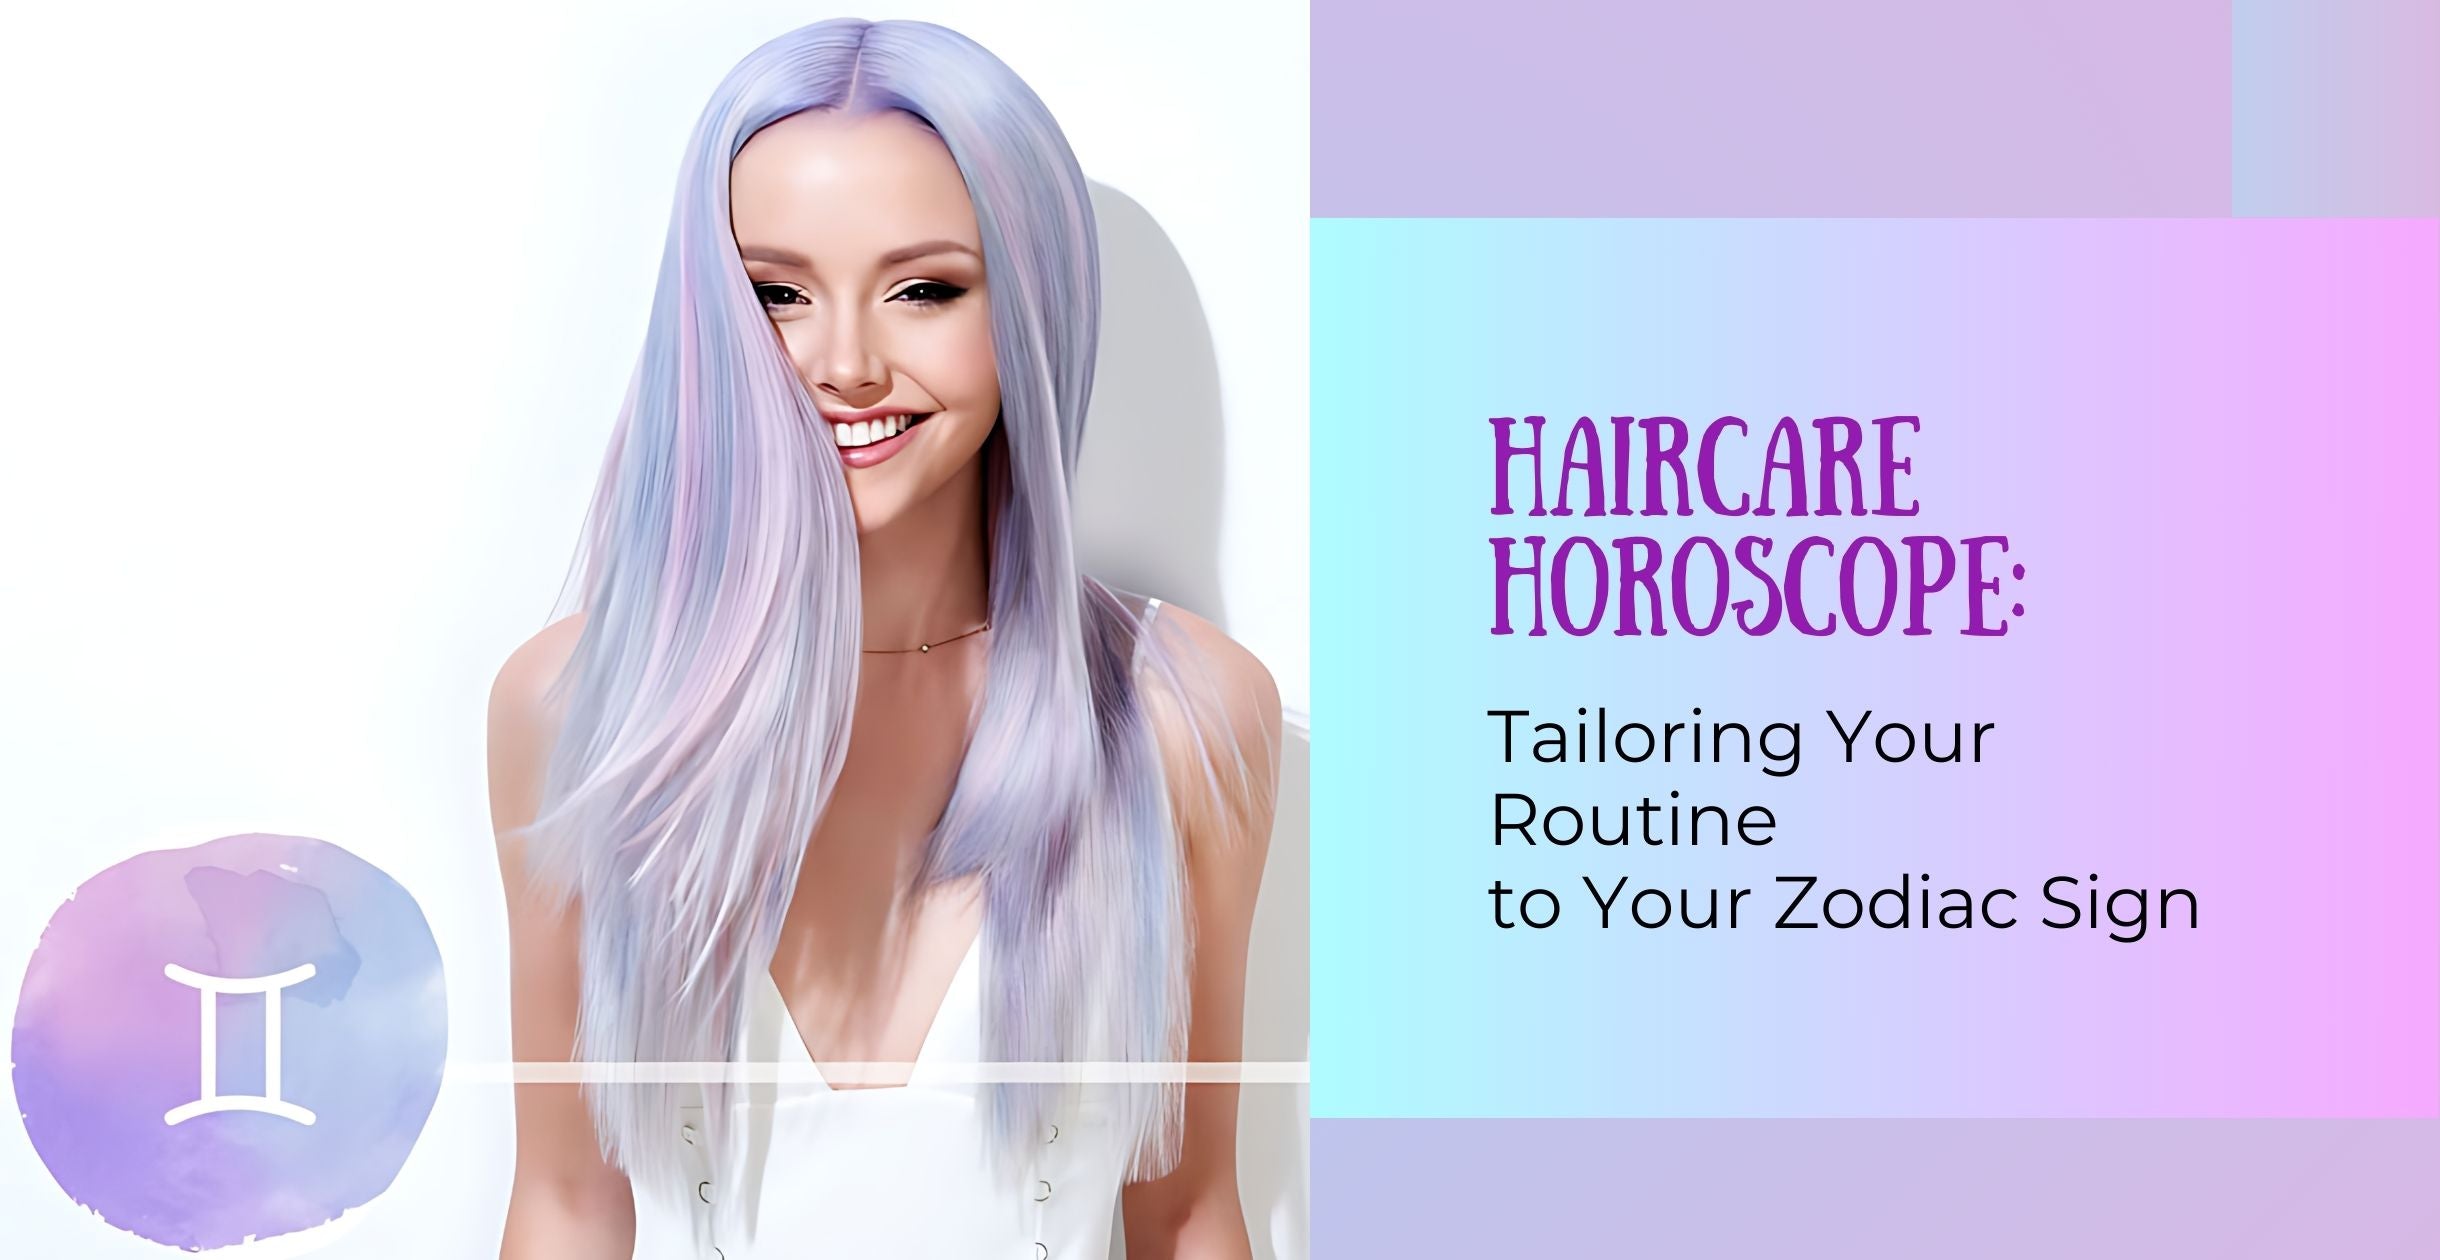 Haircare Horoscope: Tailoring Your Routine to Your Zodiac Sign